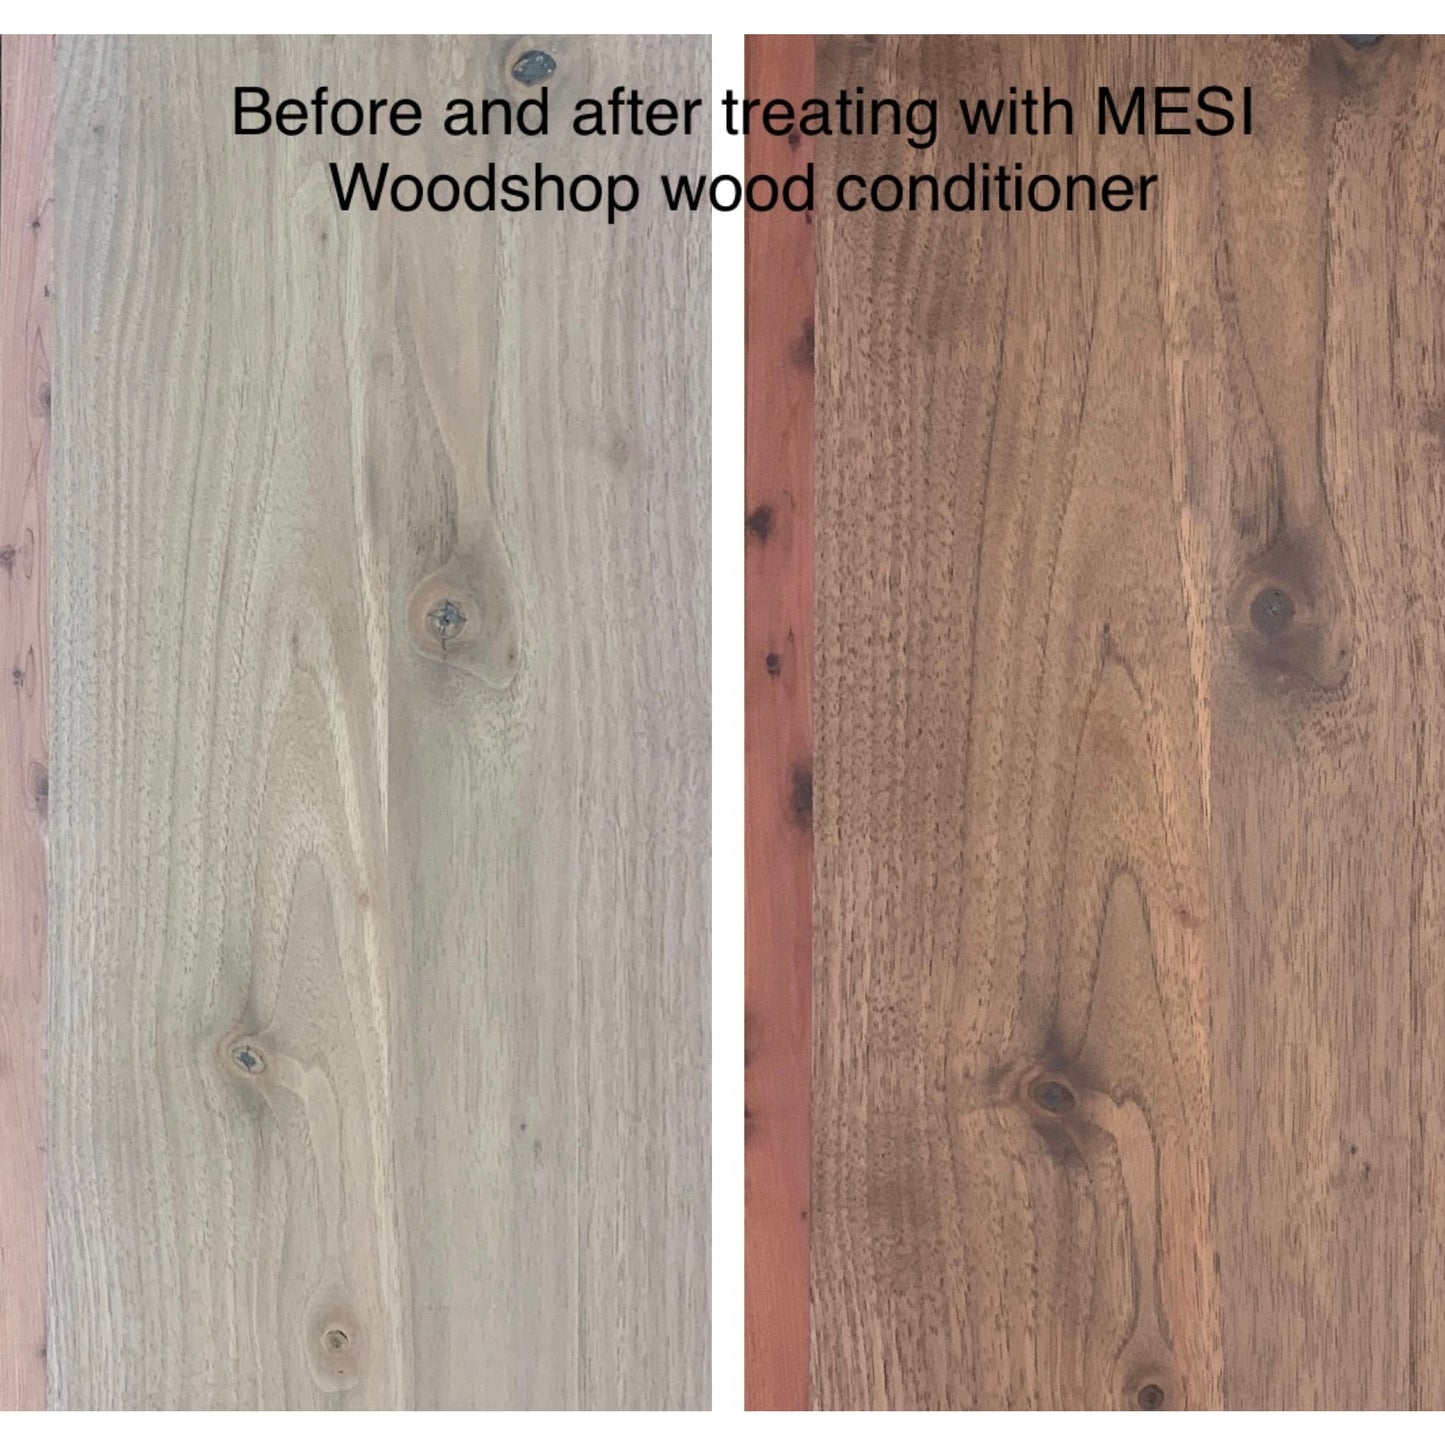 MESI All Natural Wood Treatment Conditioner